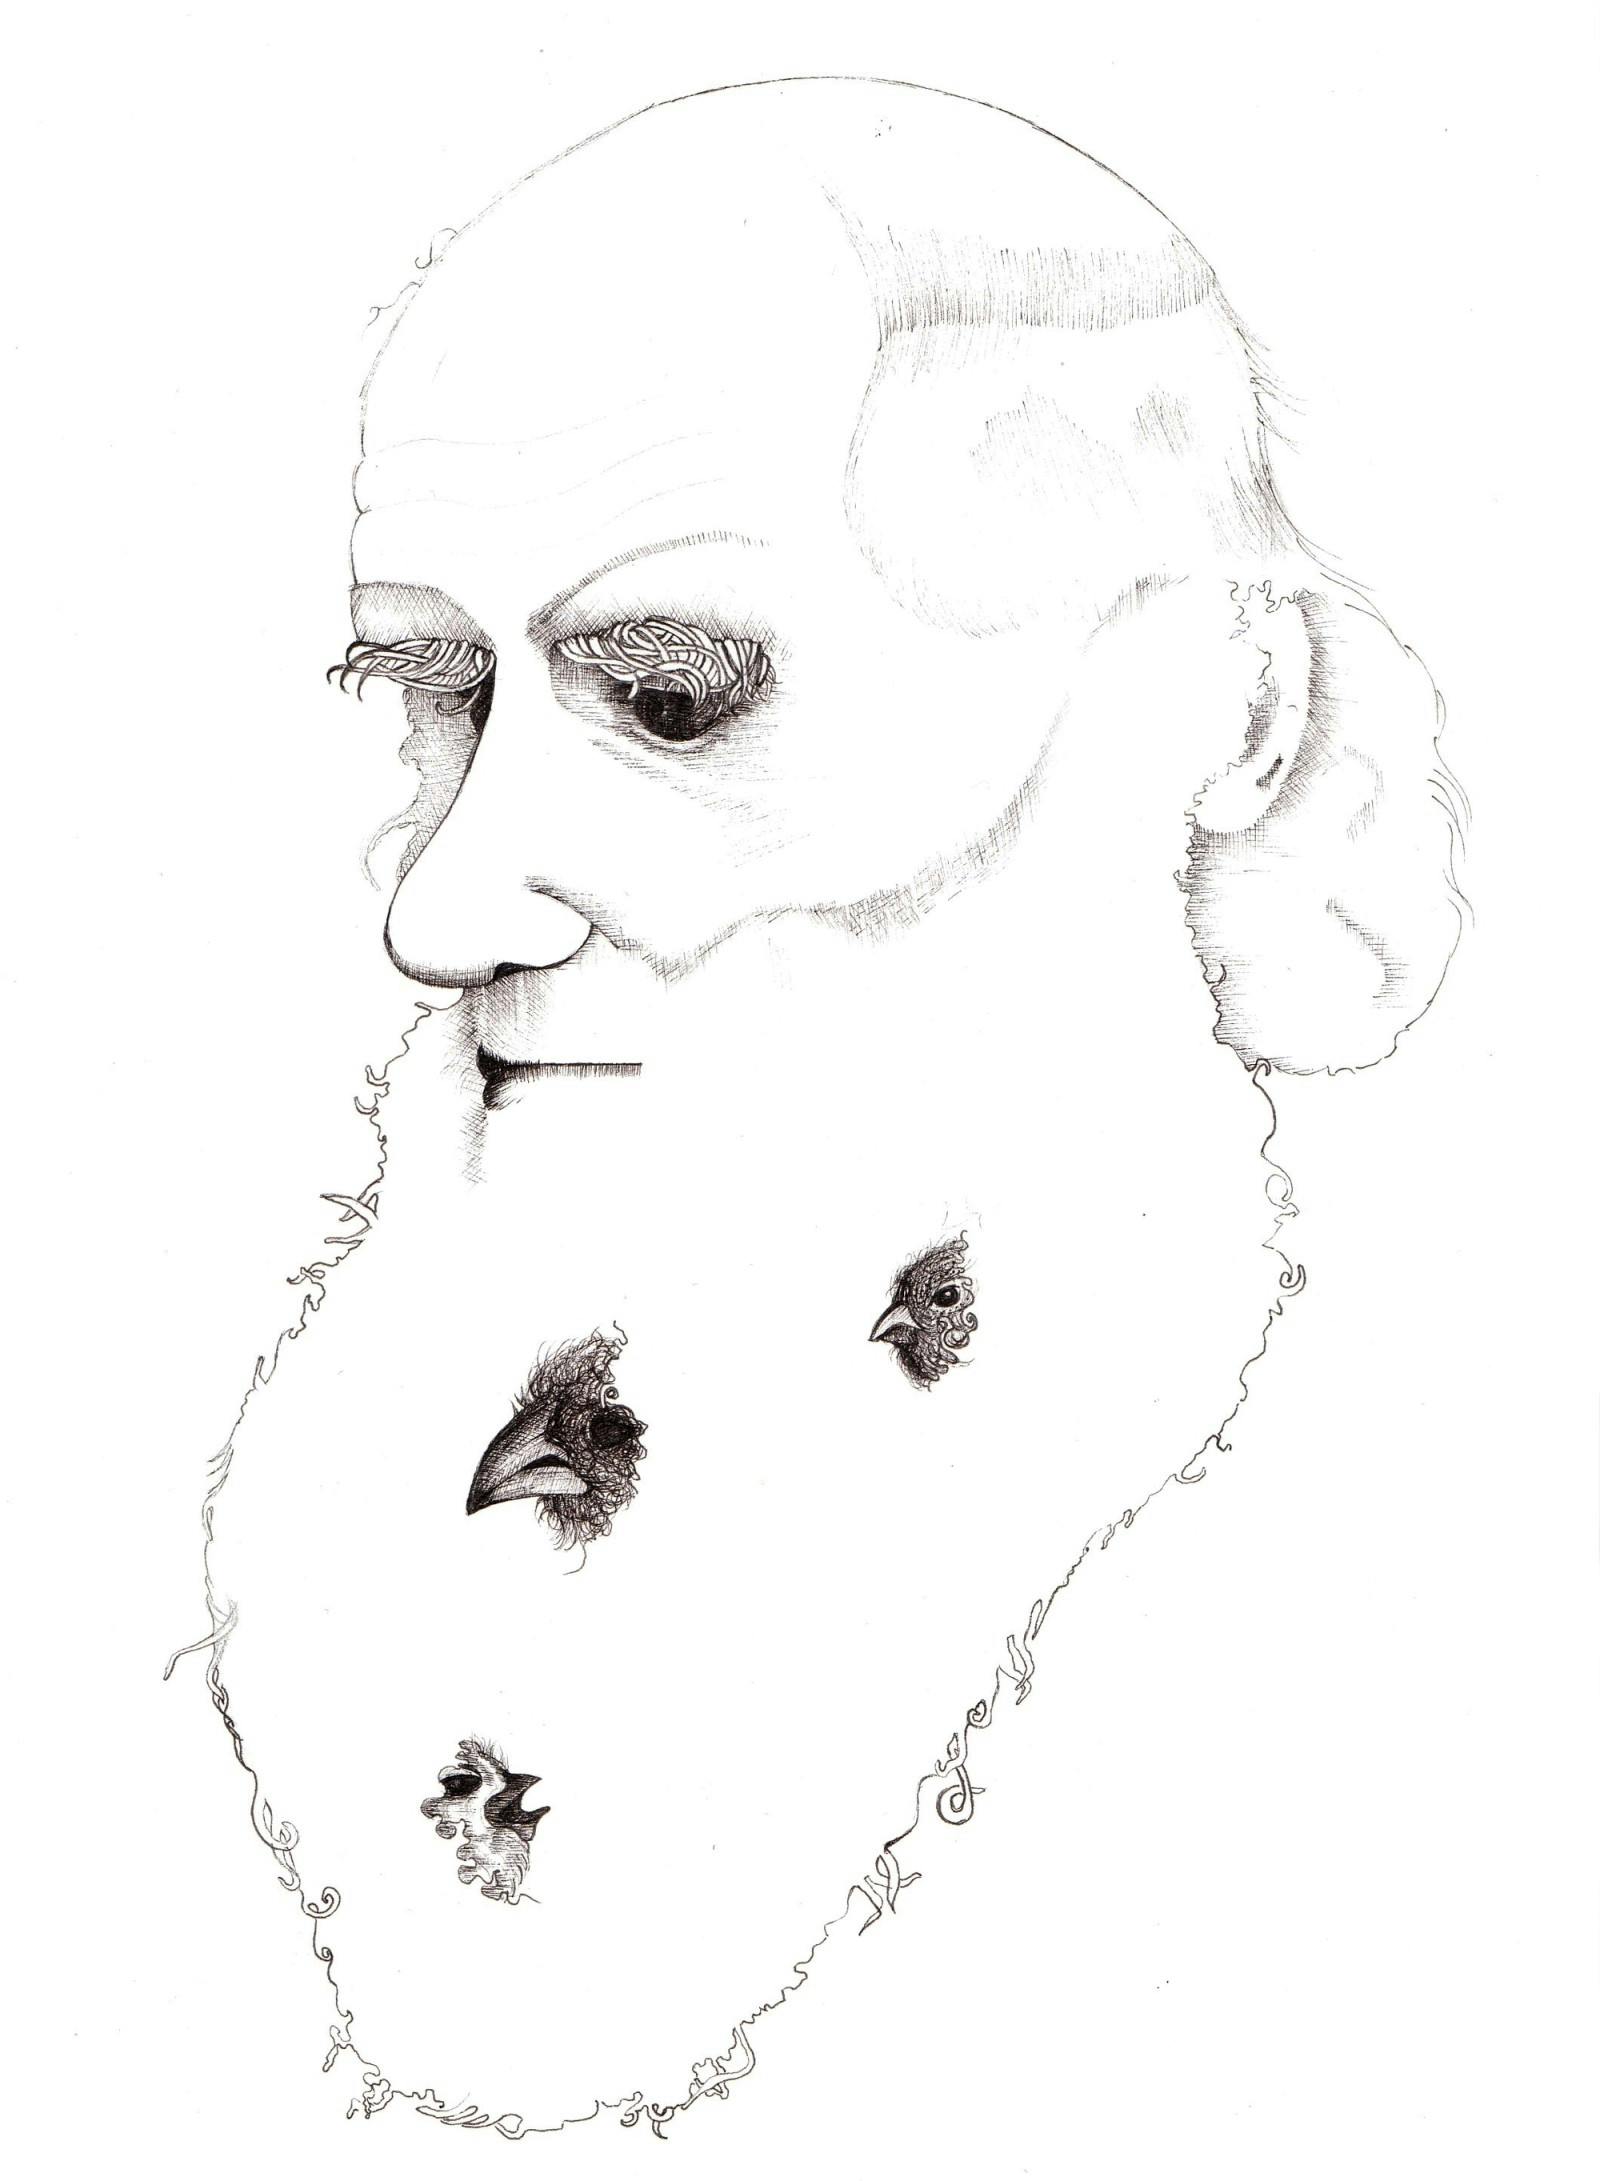 An pencil illustration of a man with a bushy beard, with birds peeking out.